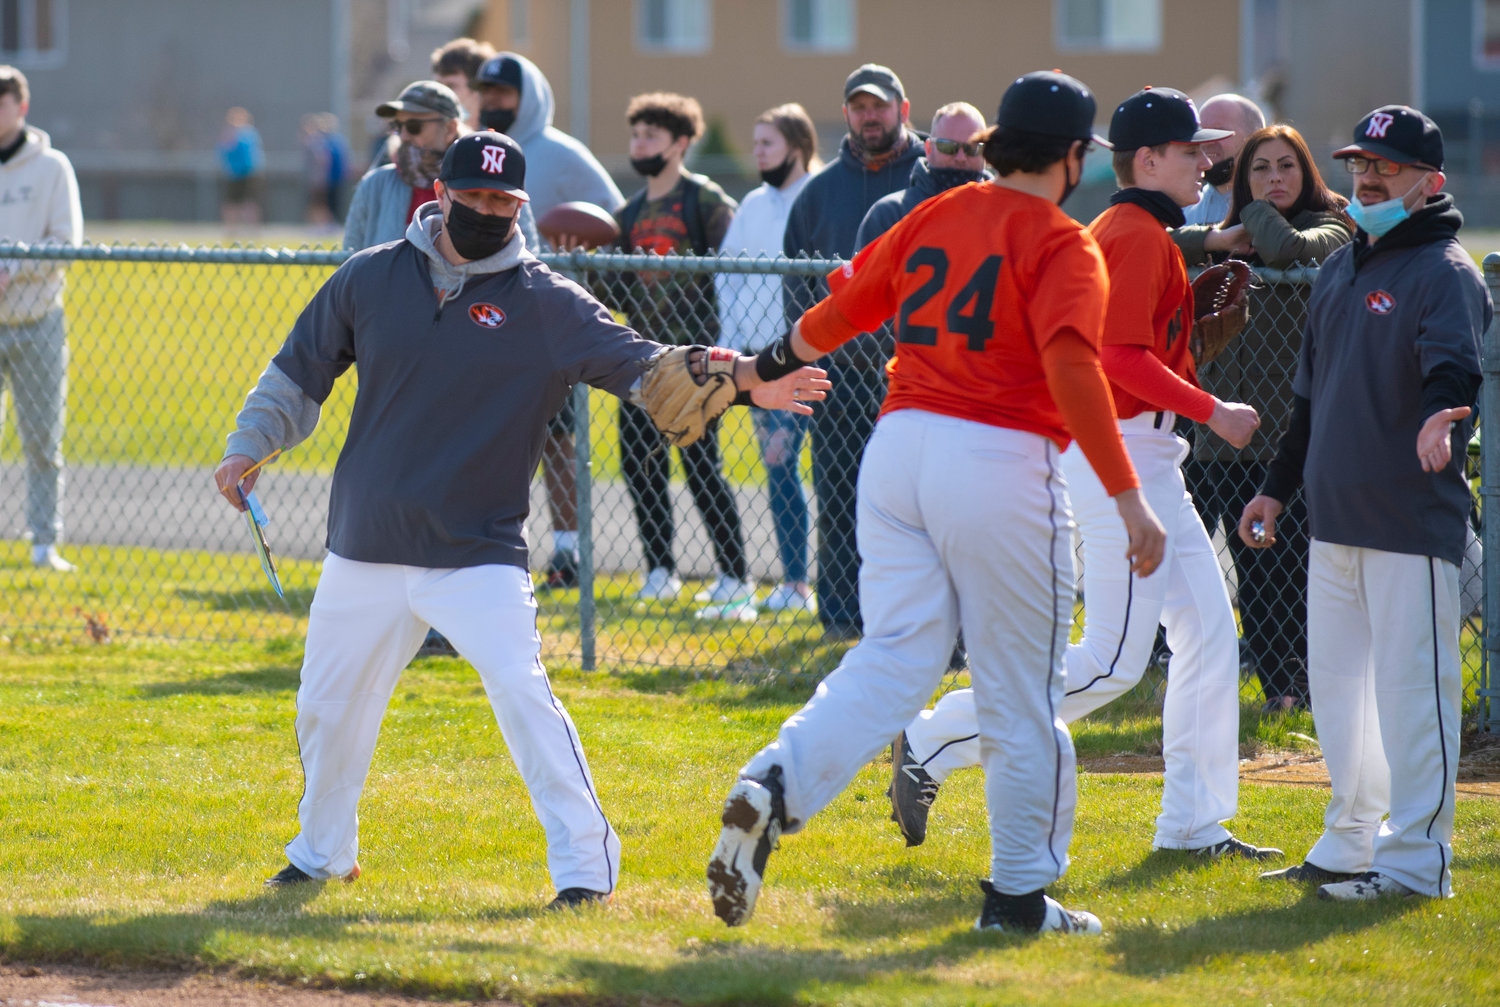 Napavine coach Brian Demarest, left, high-fives sophomore Deacon Parker (24) after the Tigers' recorded three outs in the second innning against Toutle Lake on Tuesday.